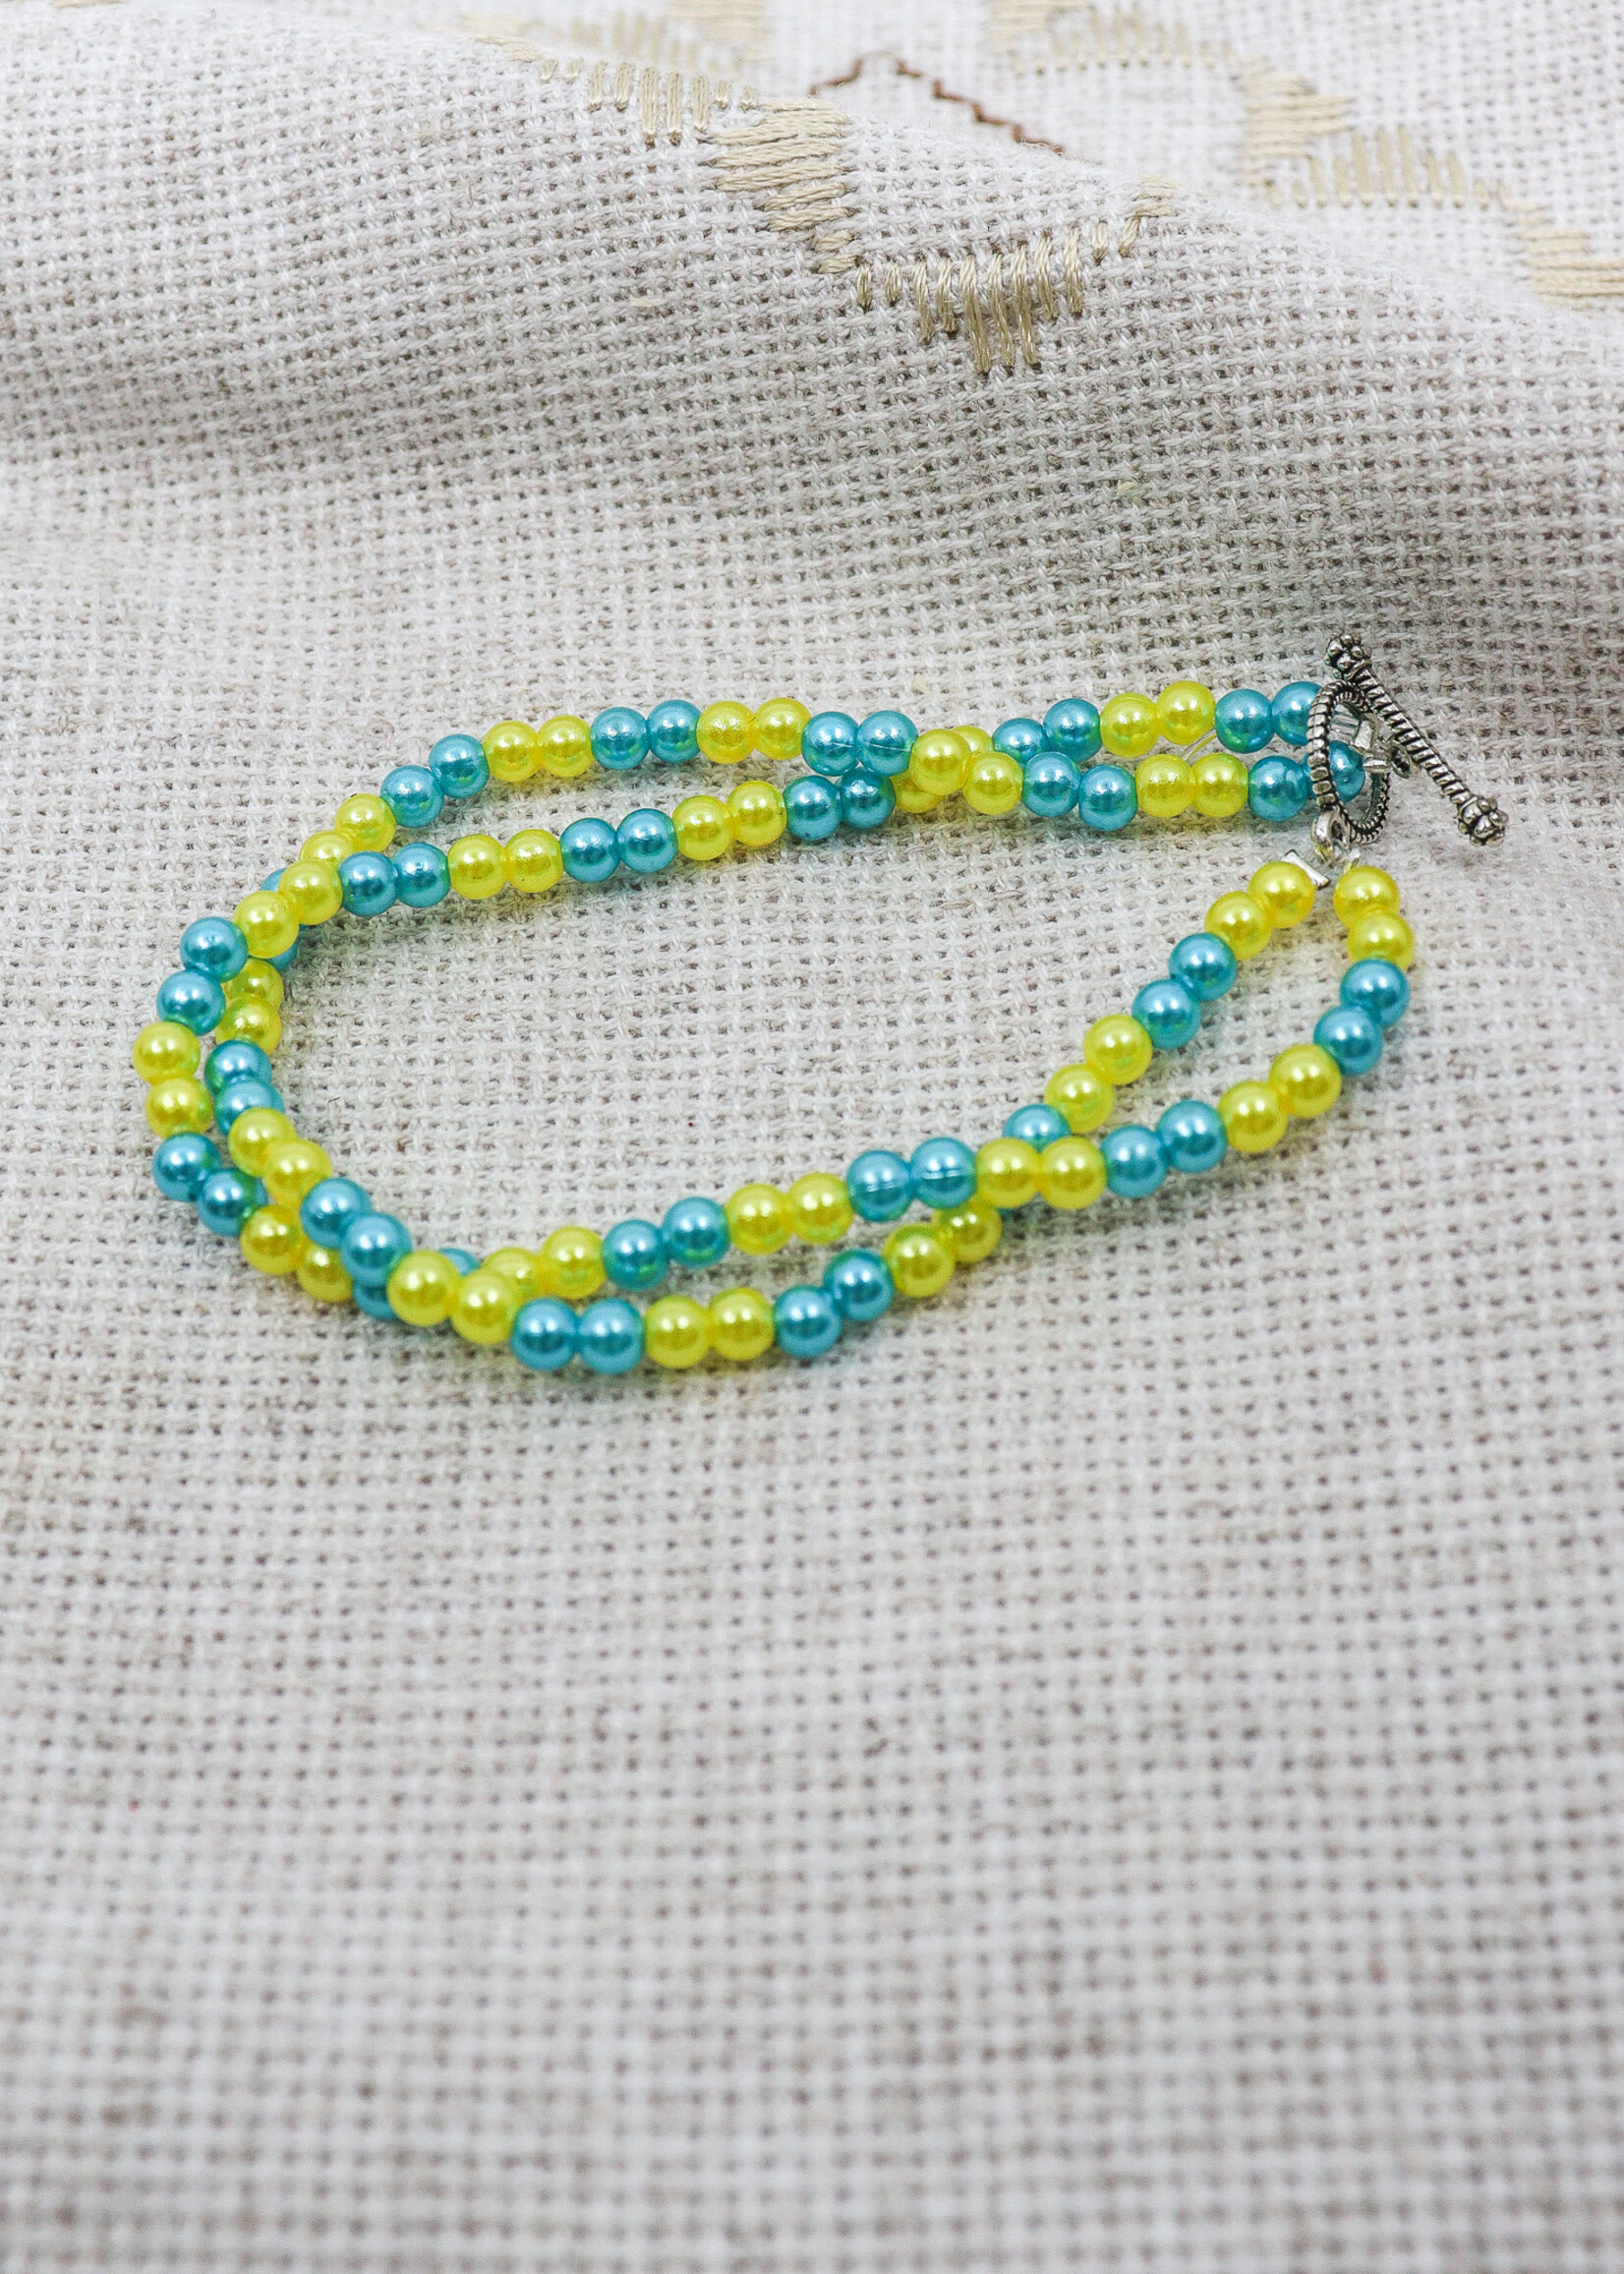 ACCESSORIES - Pearl Bracelets in Blue / Yellow